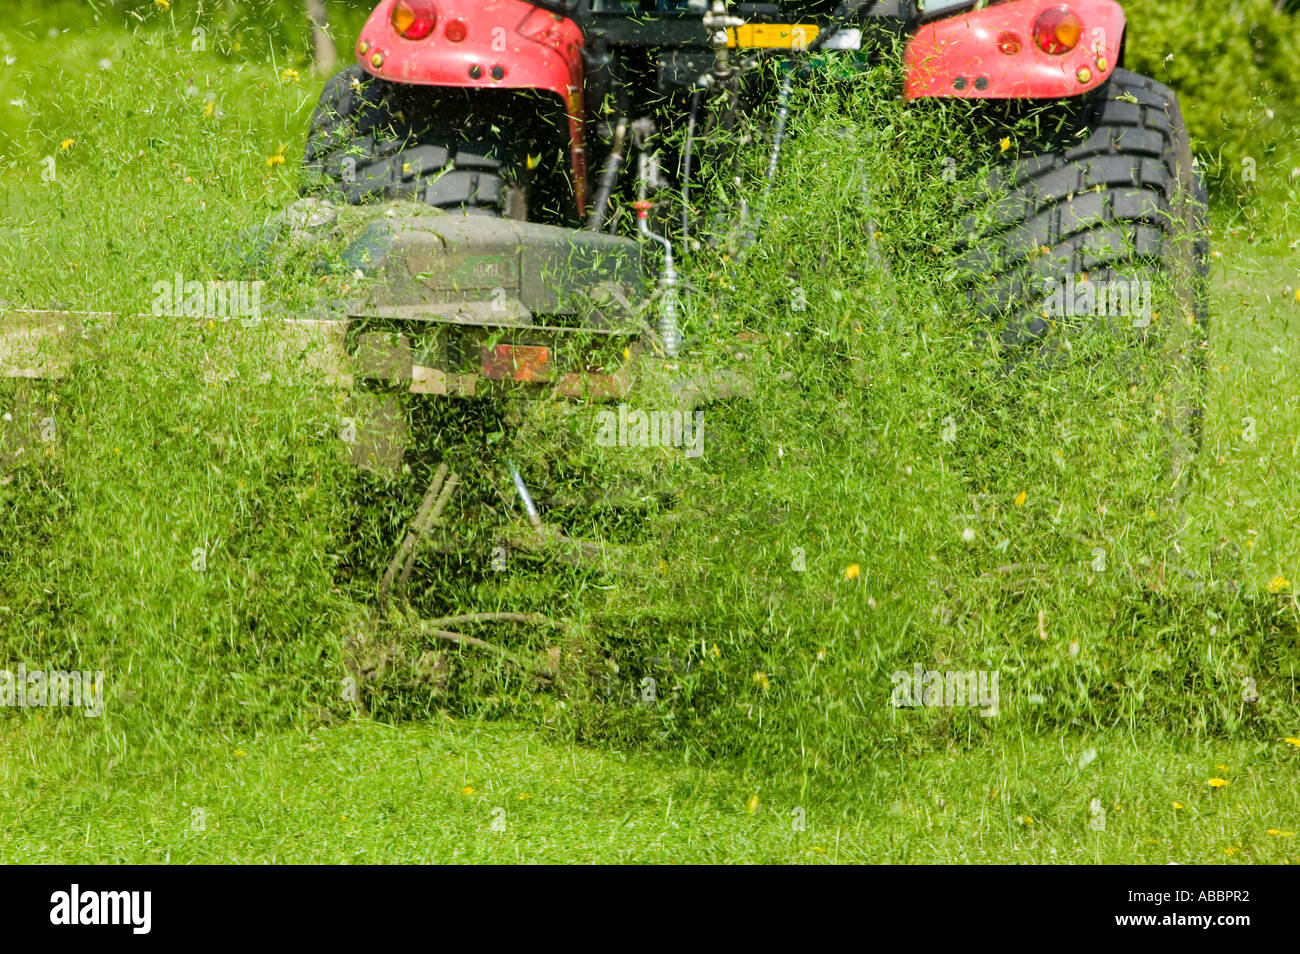 cutting grass with tractor and industrial grass cutting machine, Leicester, Leicestershire, UK Stock Photo